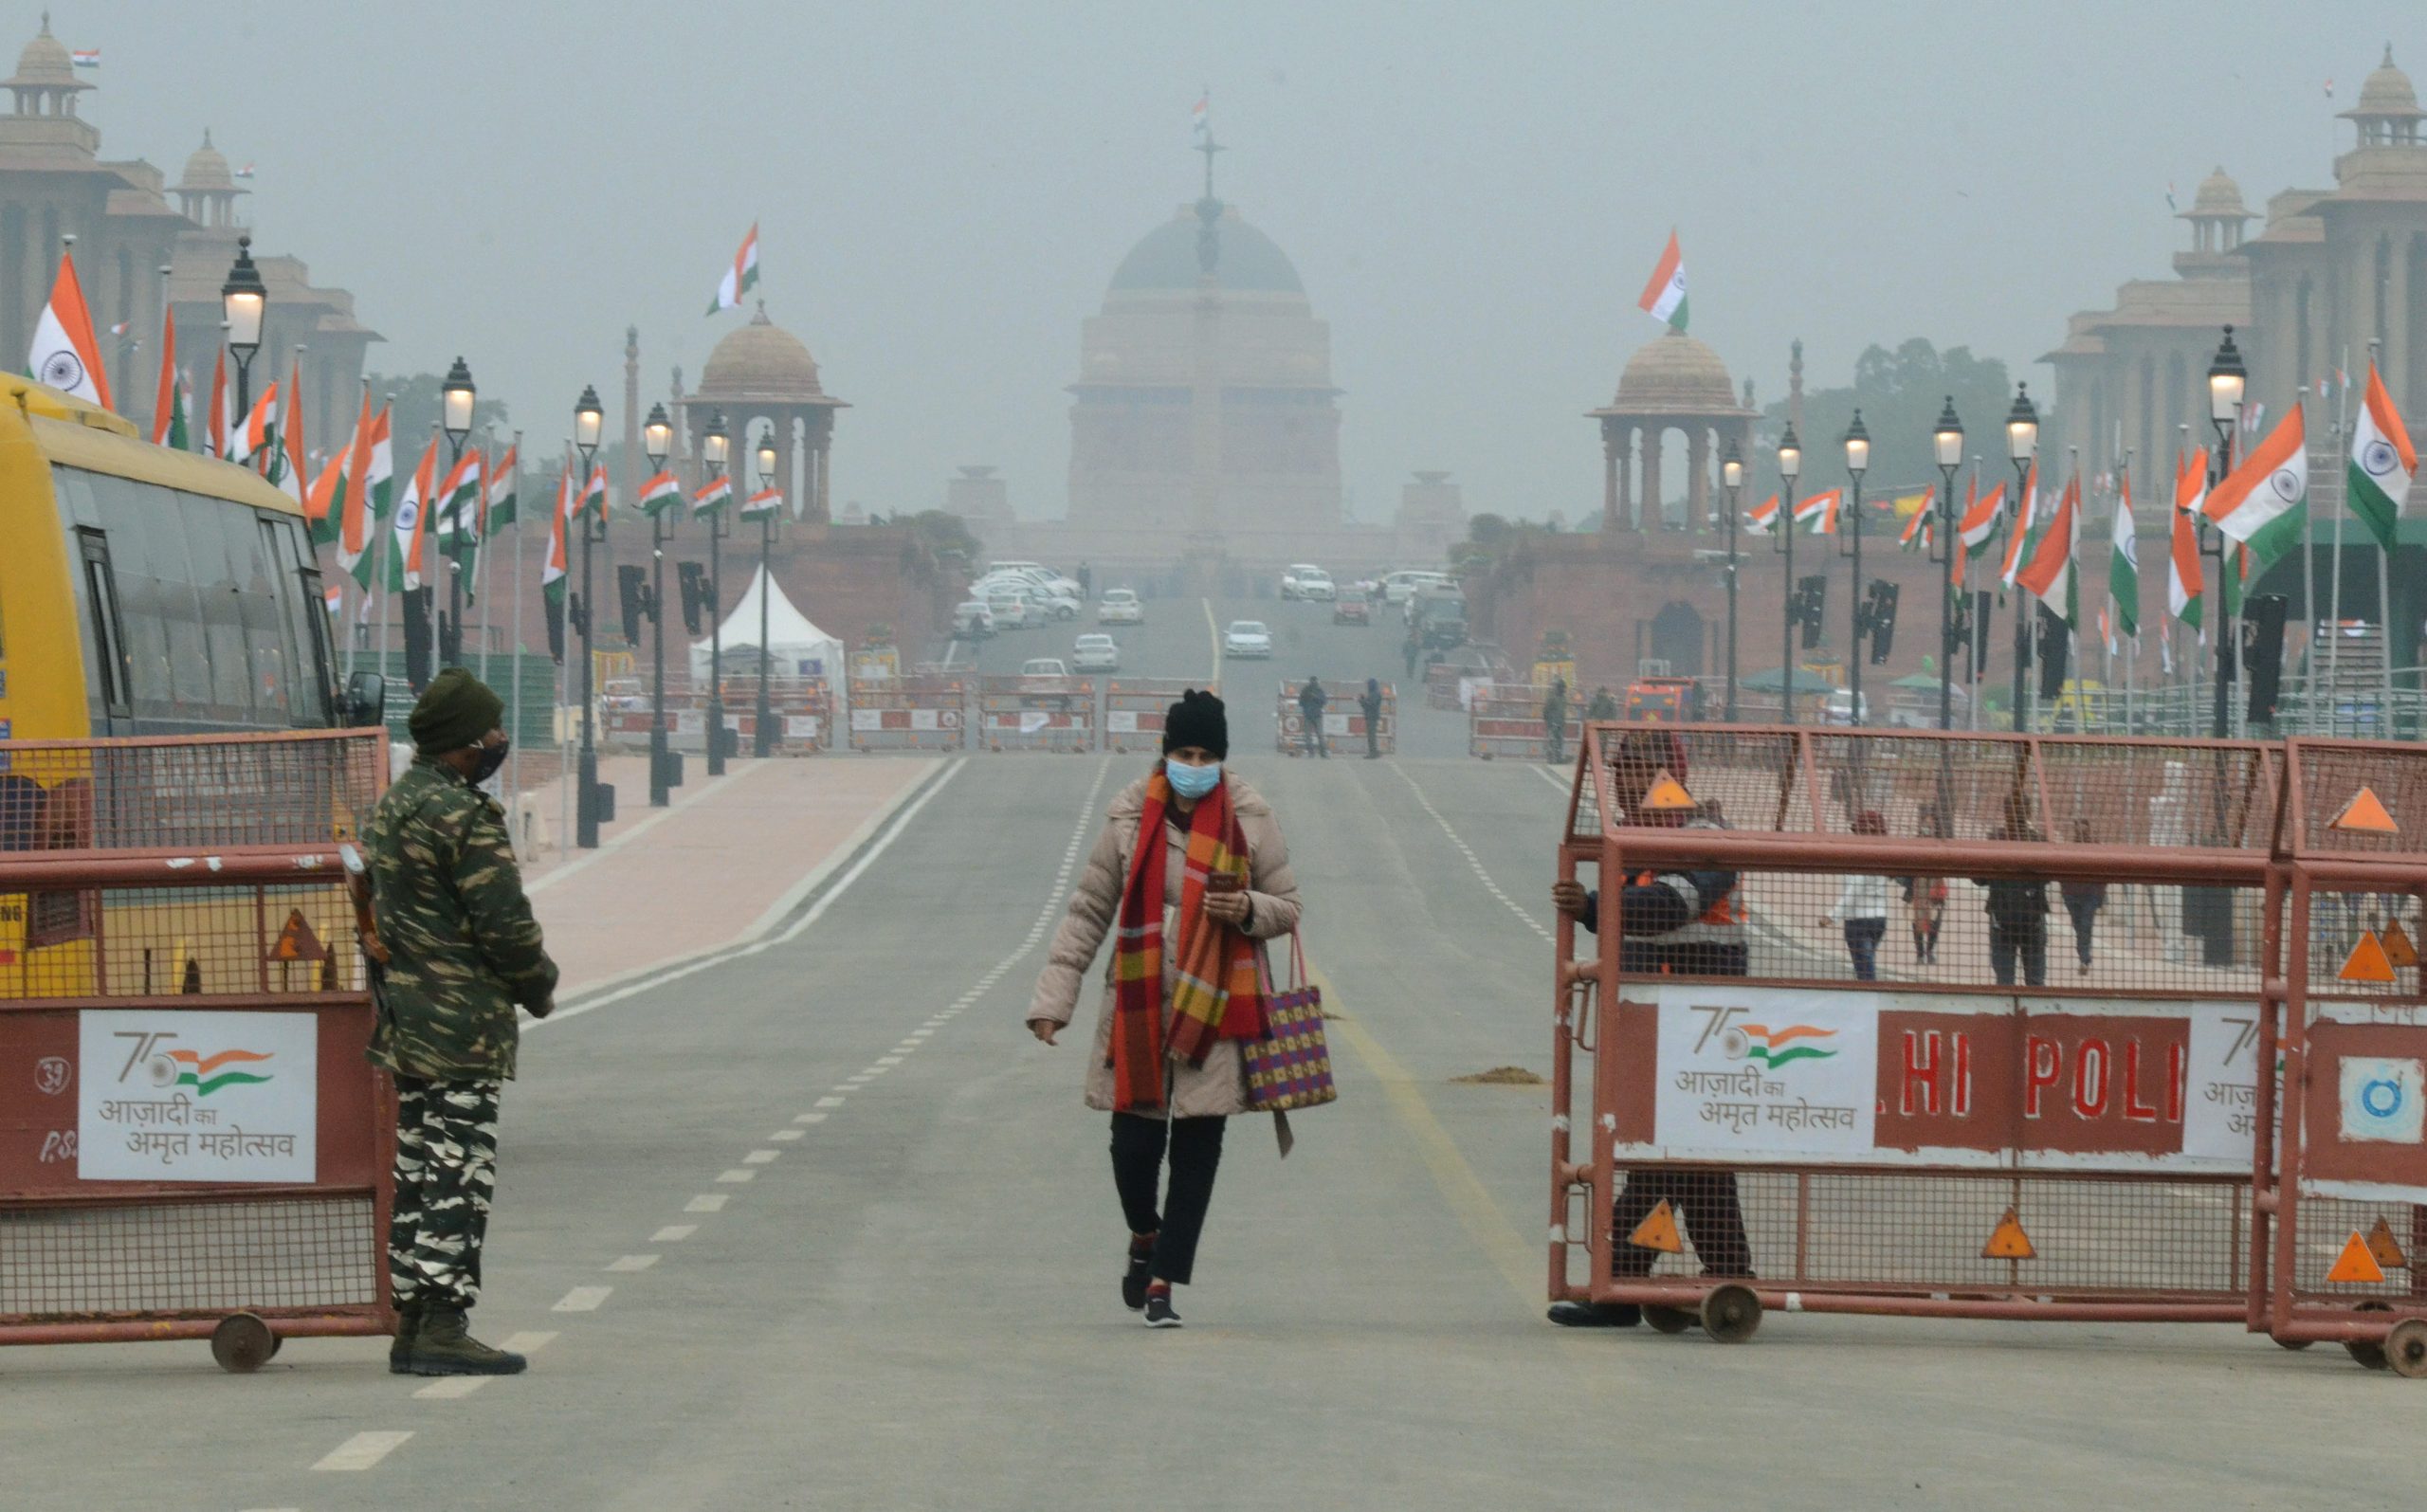 Security beefed up for Republic Day 2022